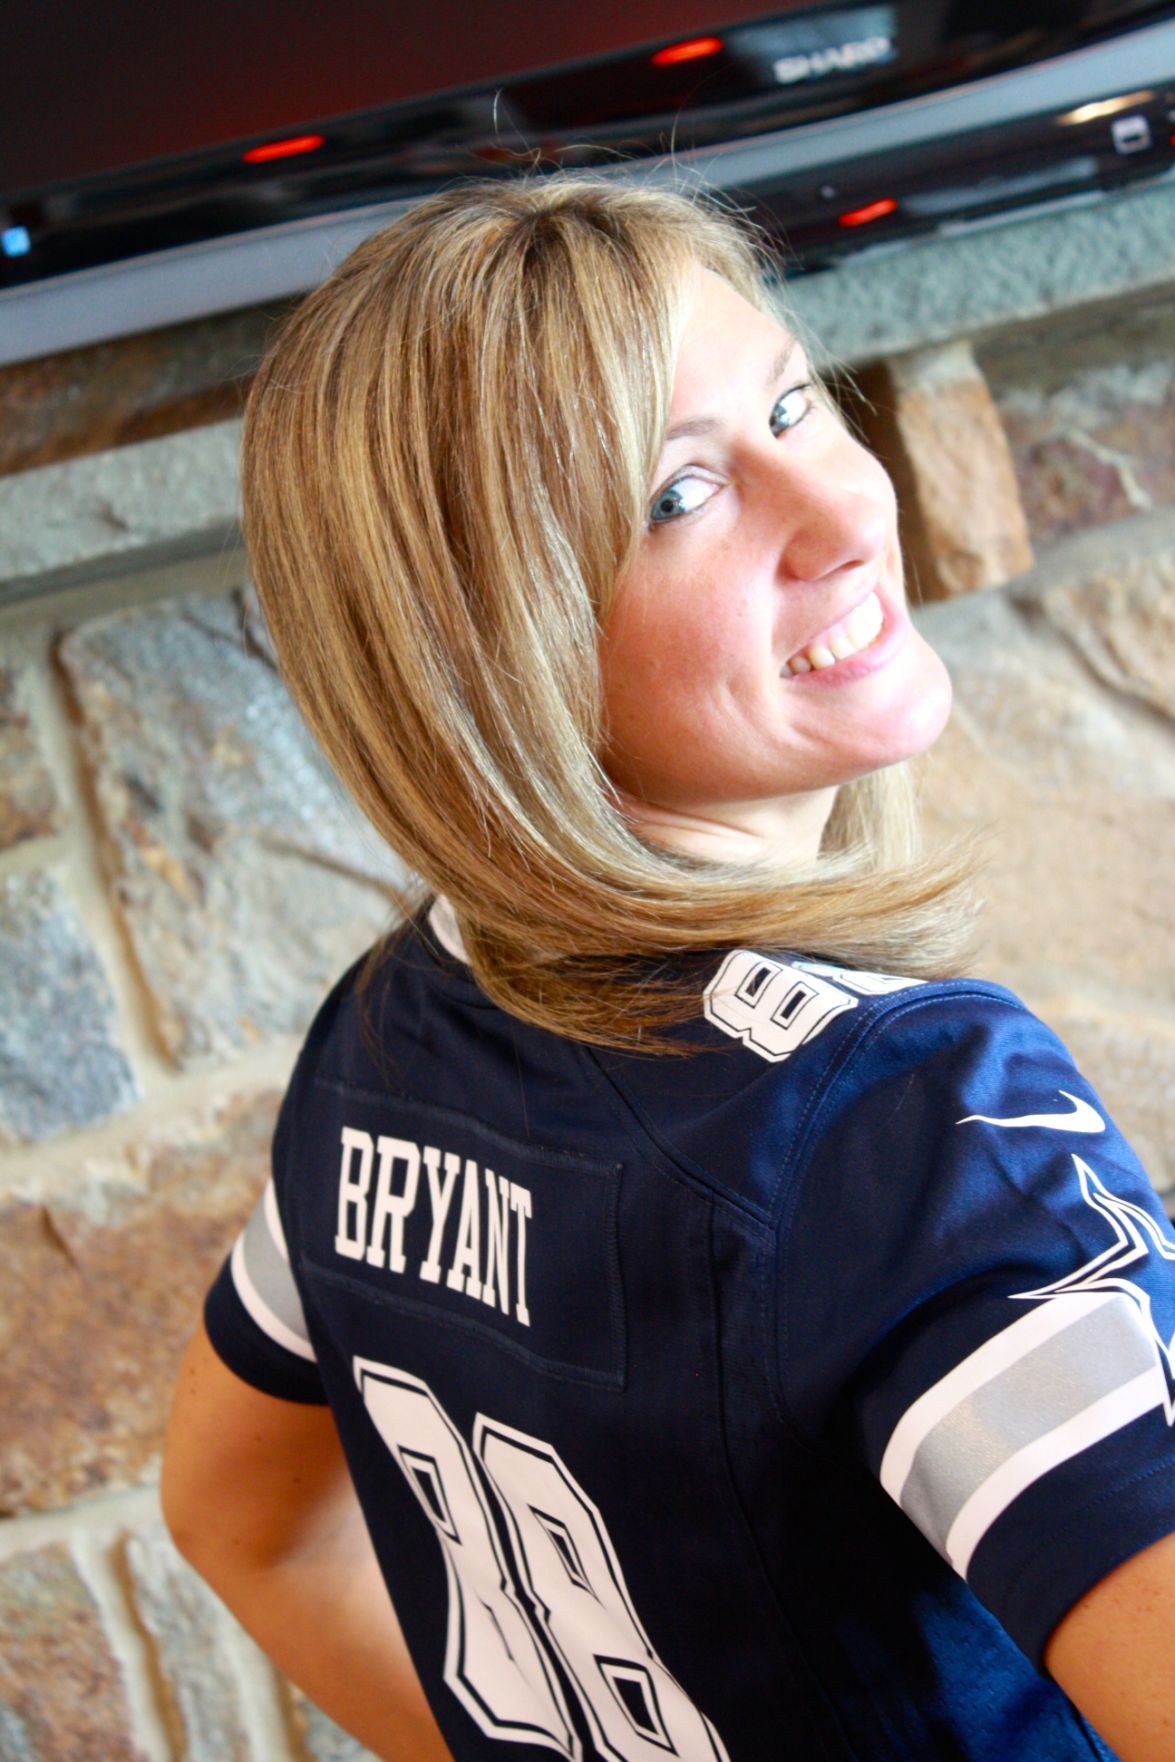 Stepping Out: State Farm agent goes from dresses to jerseys | Misc. Features ...